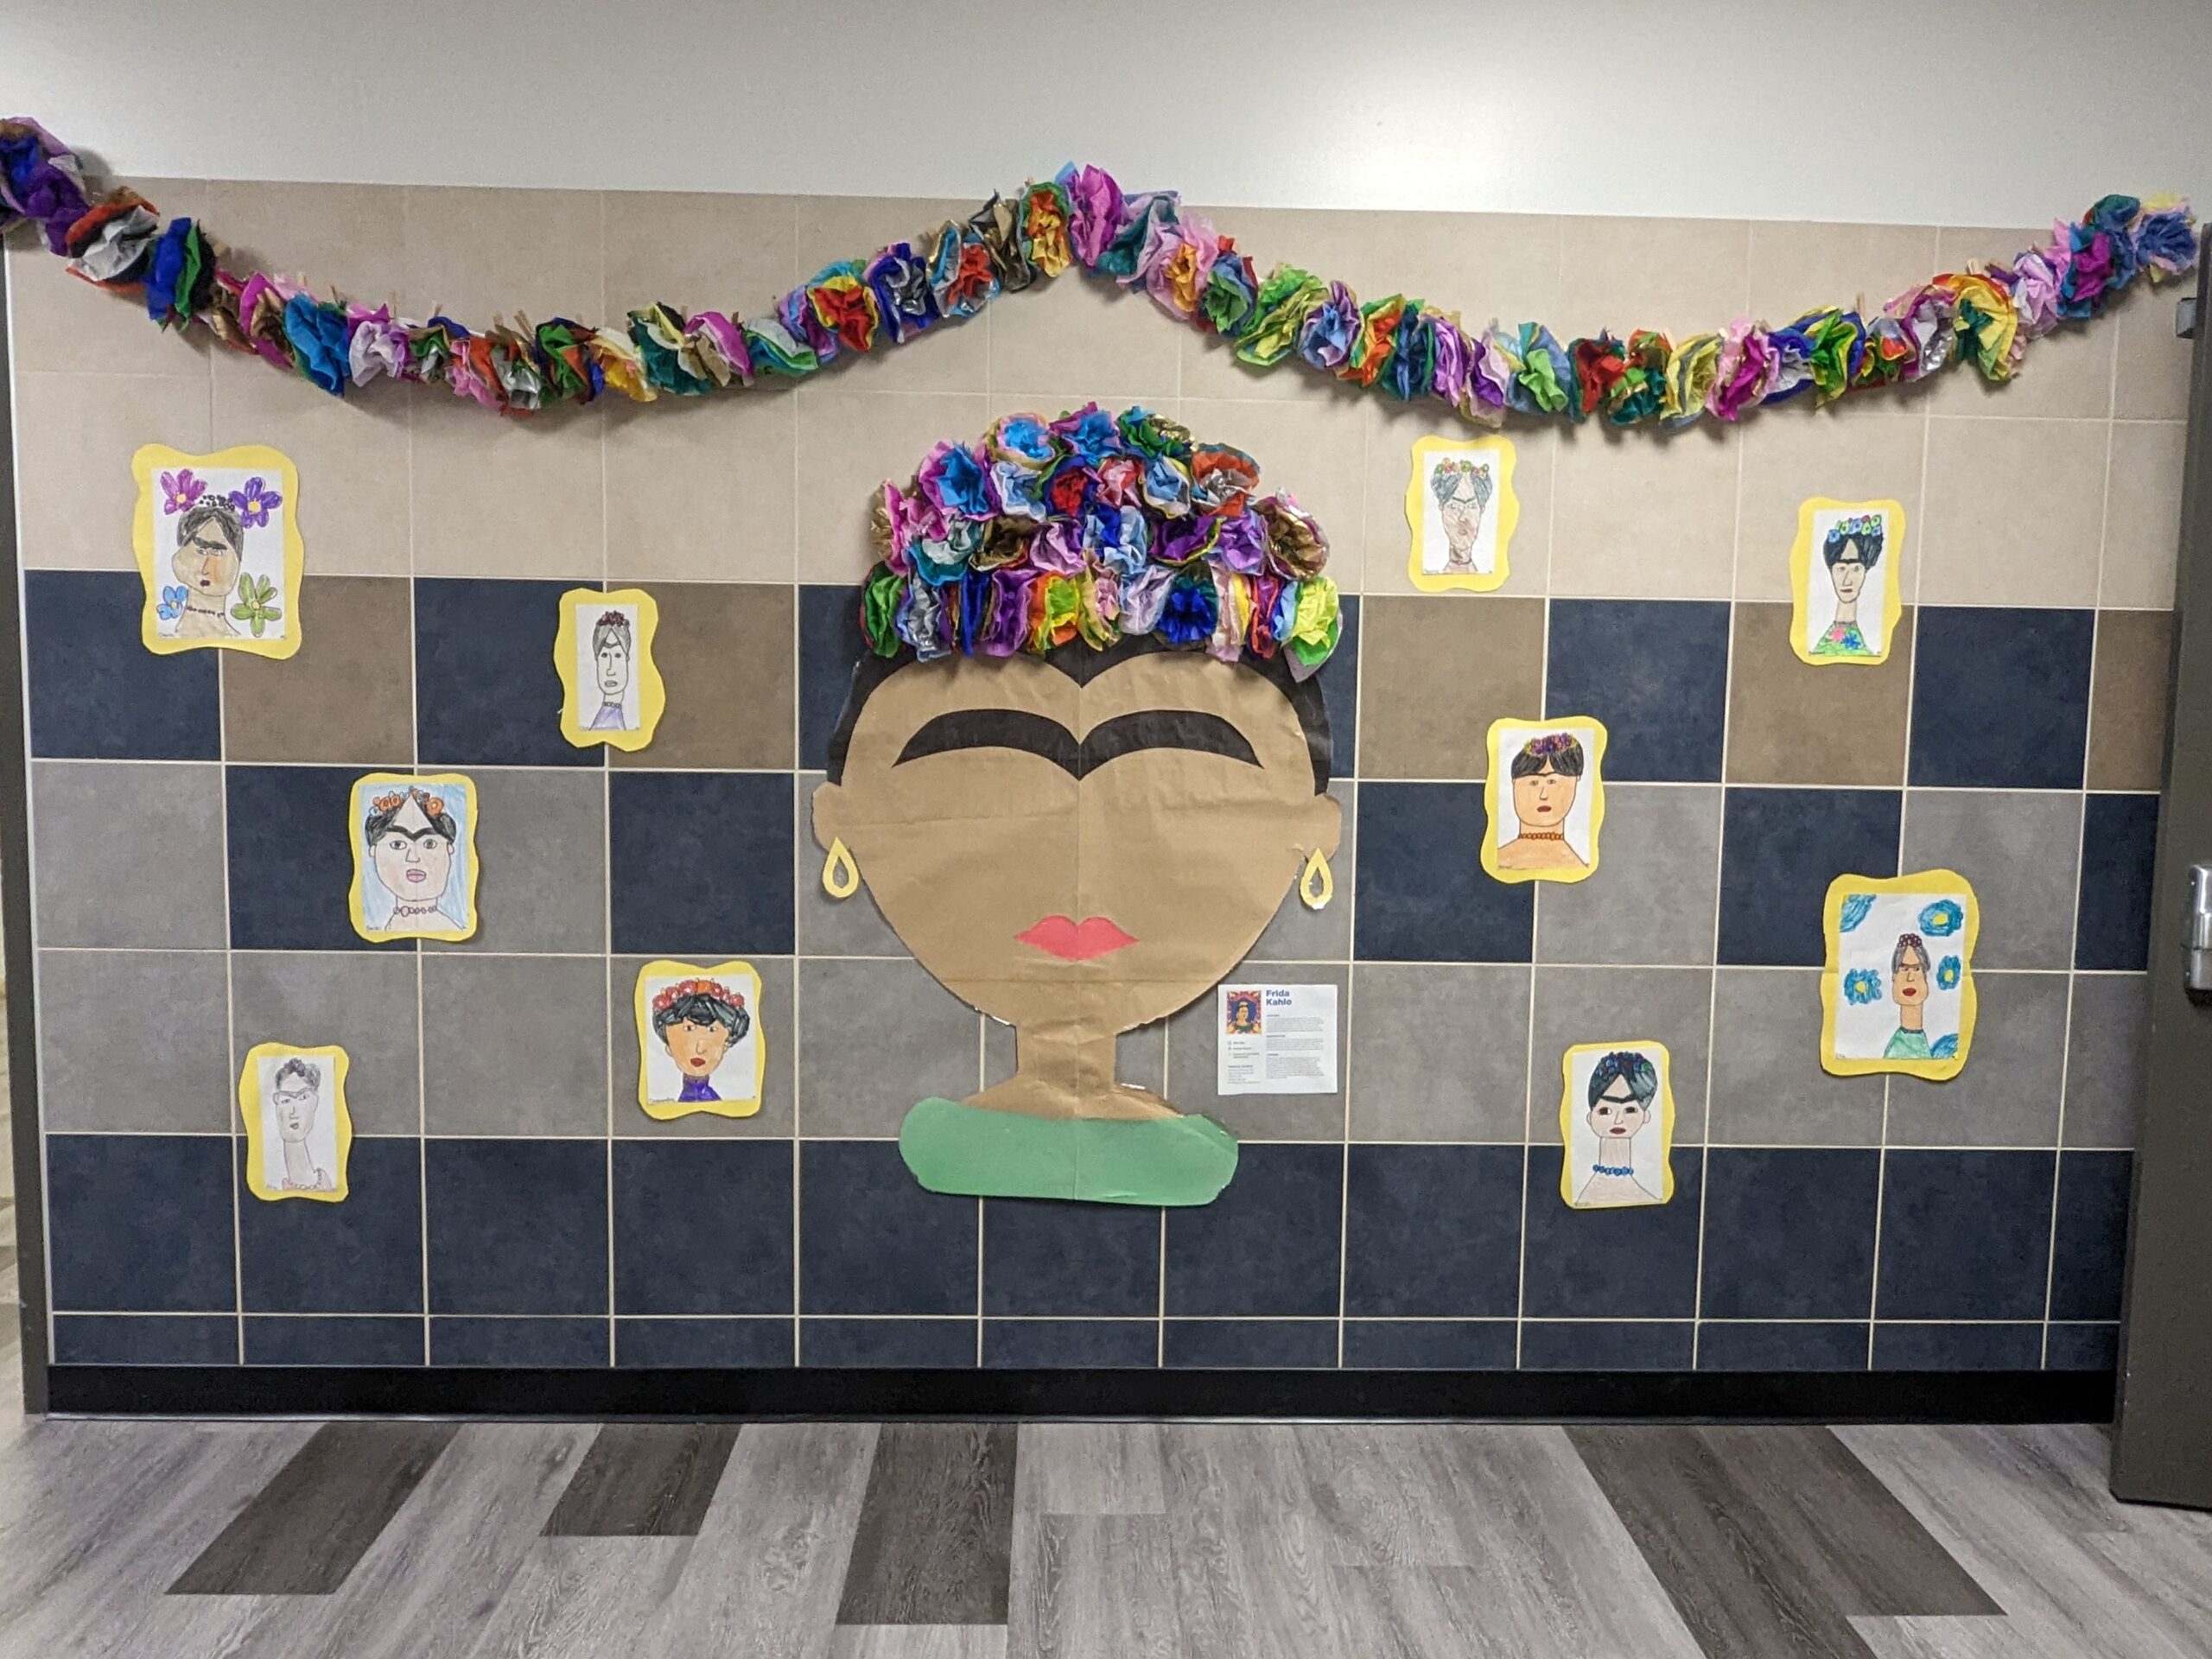 A large Frida Kahlo display with tissue paper flowers and student drawn portraits.